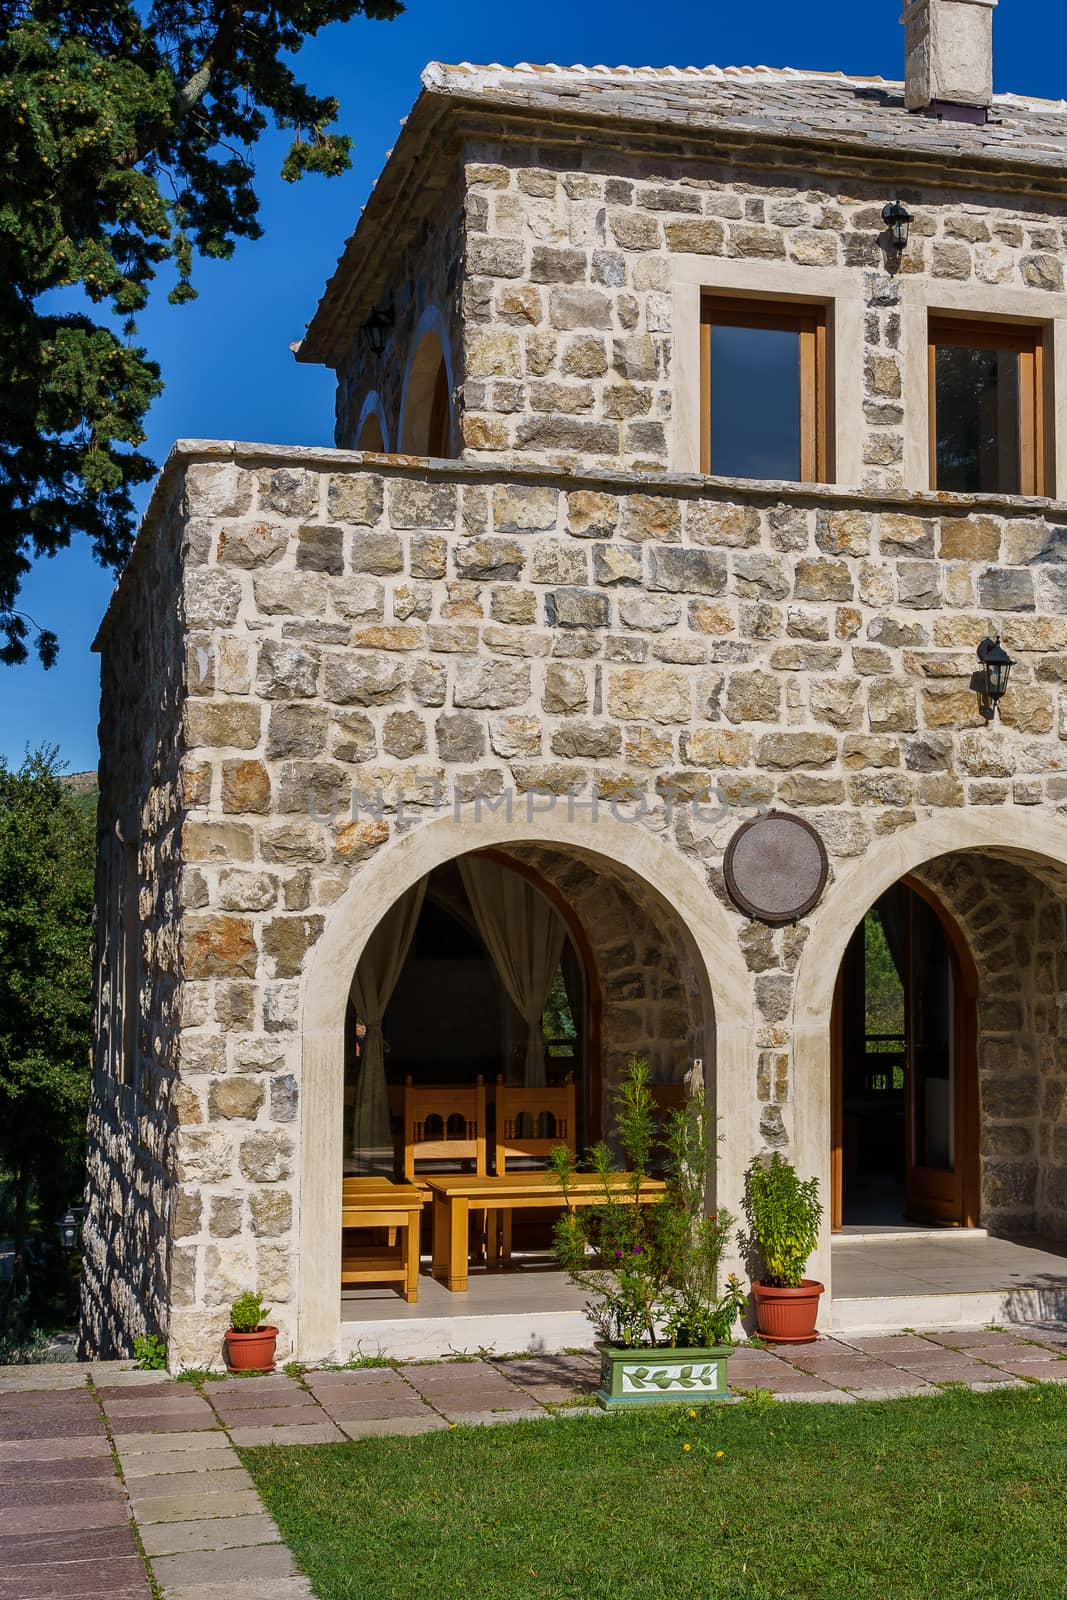 Mediterranean architecture. The stone building of the Tvrdos Monastery in Bosnia.